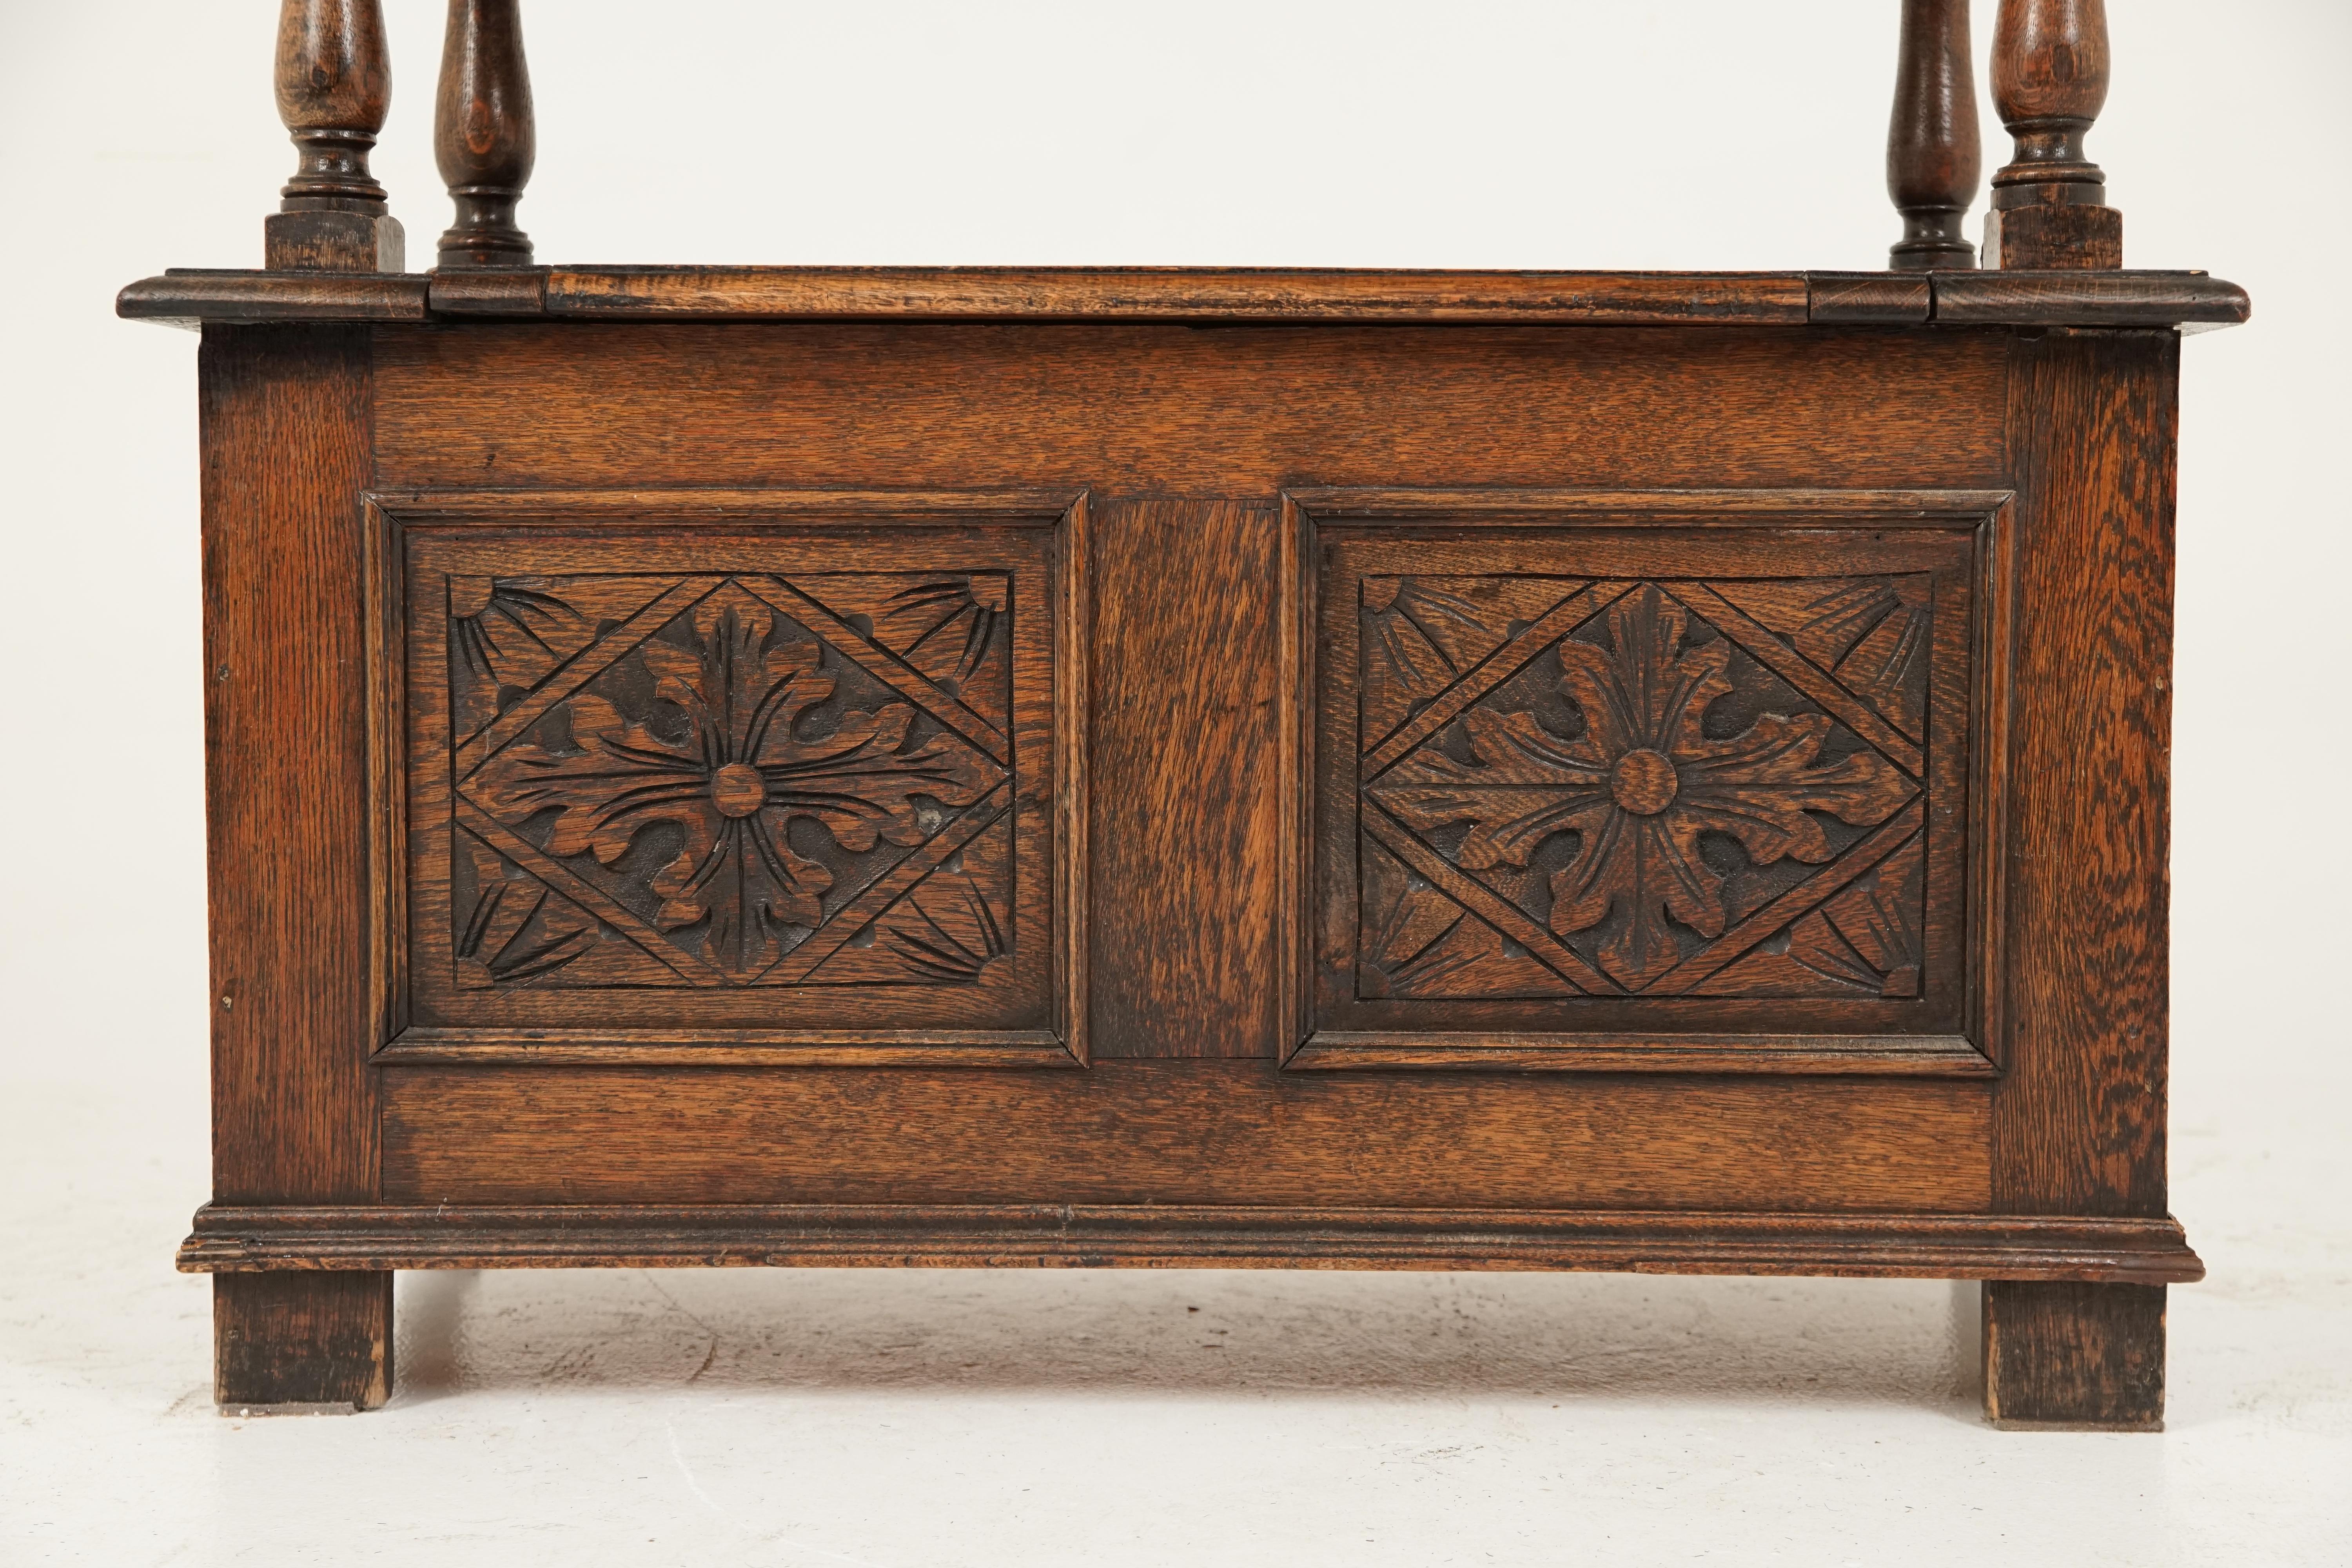 Antique carved oak monk's bench, settee, hall bench, Scotland 1890, B2739

Scotland 1890
Solid oak
Original finish
Featuring rich patterns
Exquisite carved panel to the back and front
The stand up back can be folded down to create a